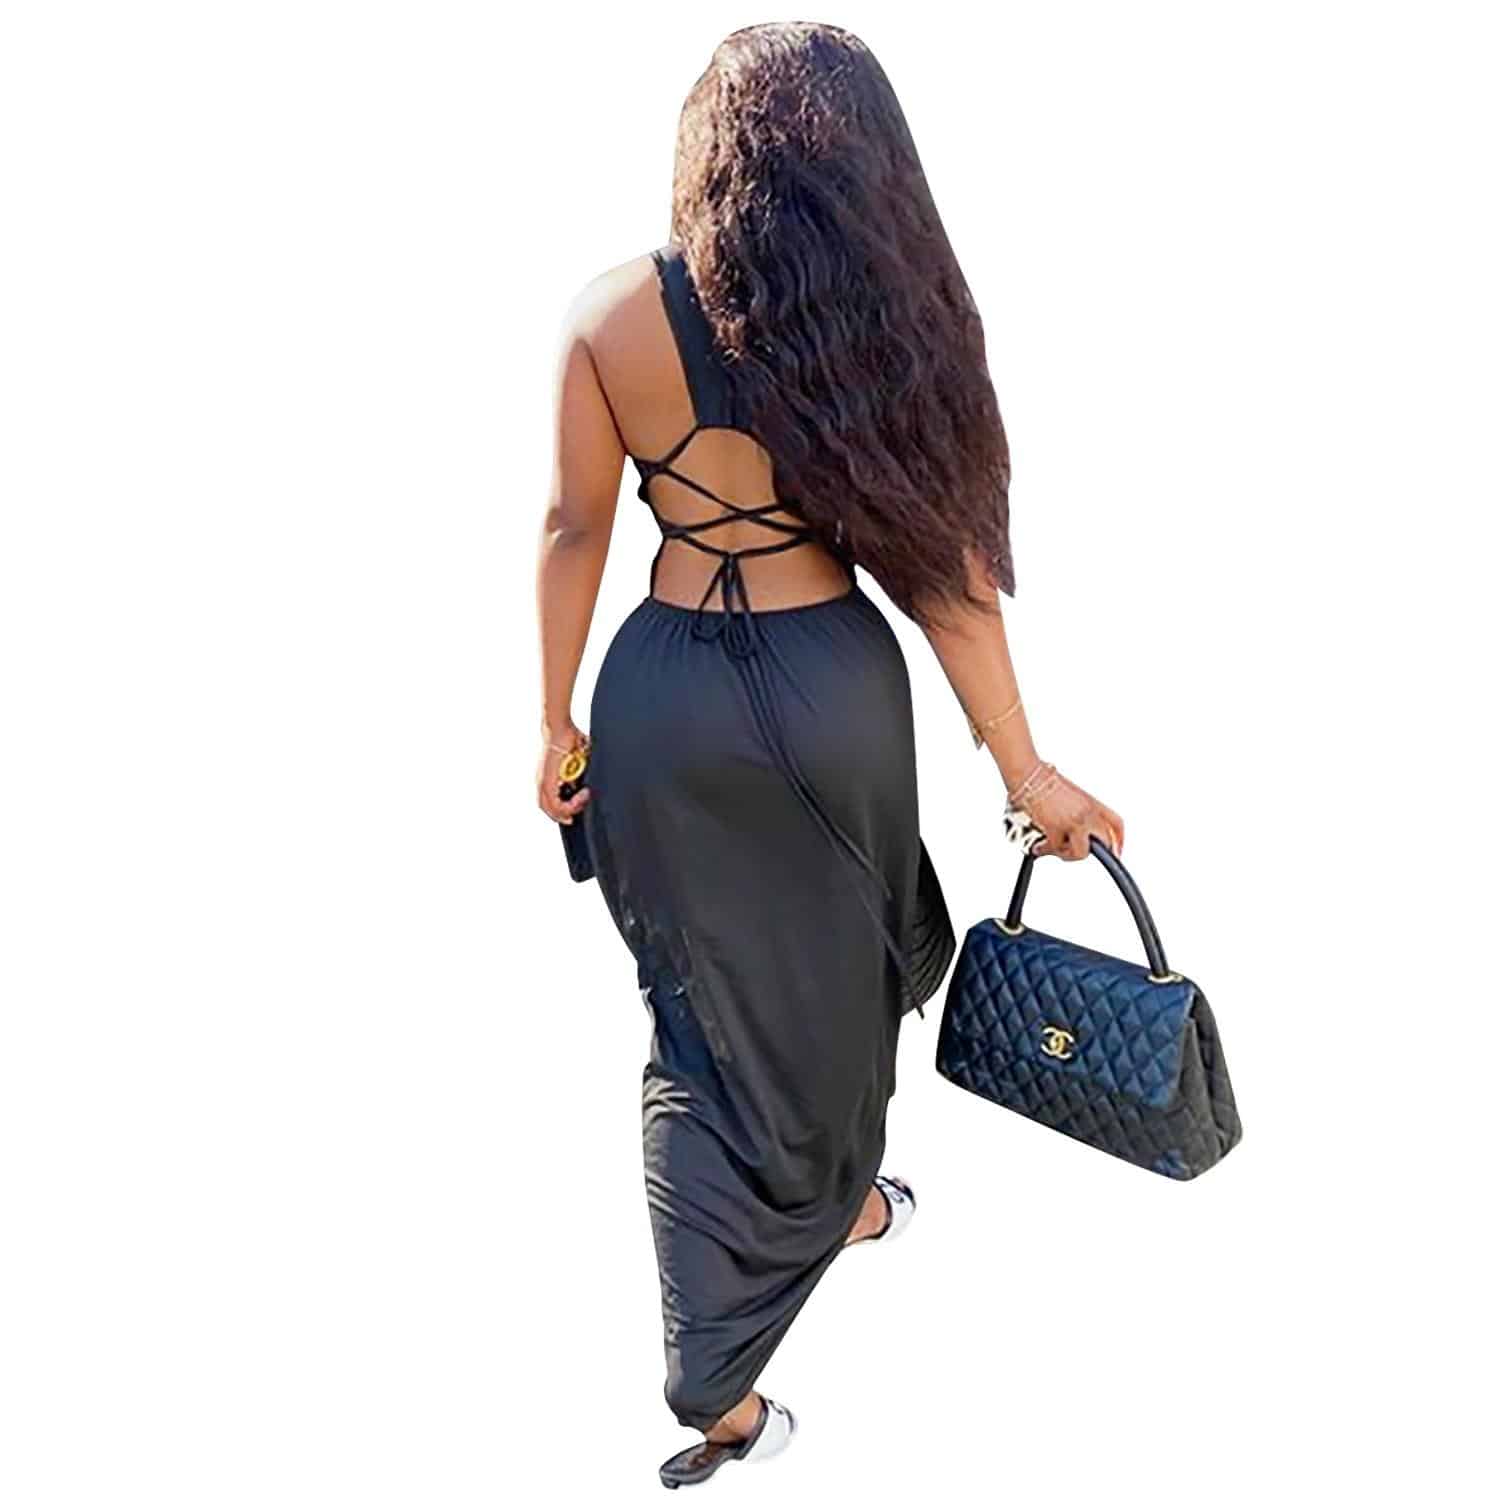 Zoctuo Tank Long Sexy Club Bodycon Dress Streetwear 2020 Casual Lace Up Open Back Maxi Dress Fashion Square Collar Solid Dresses